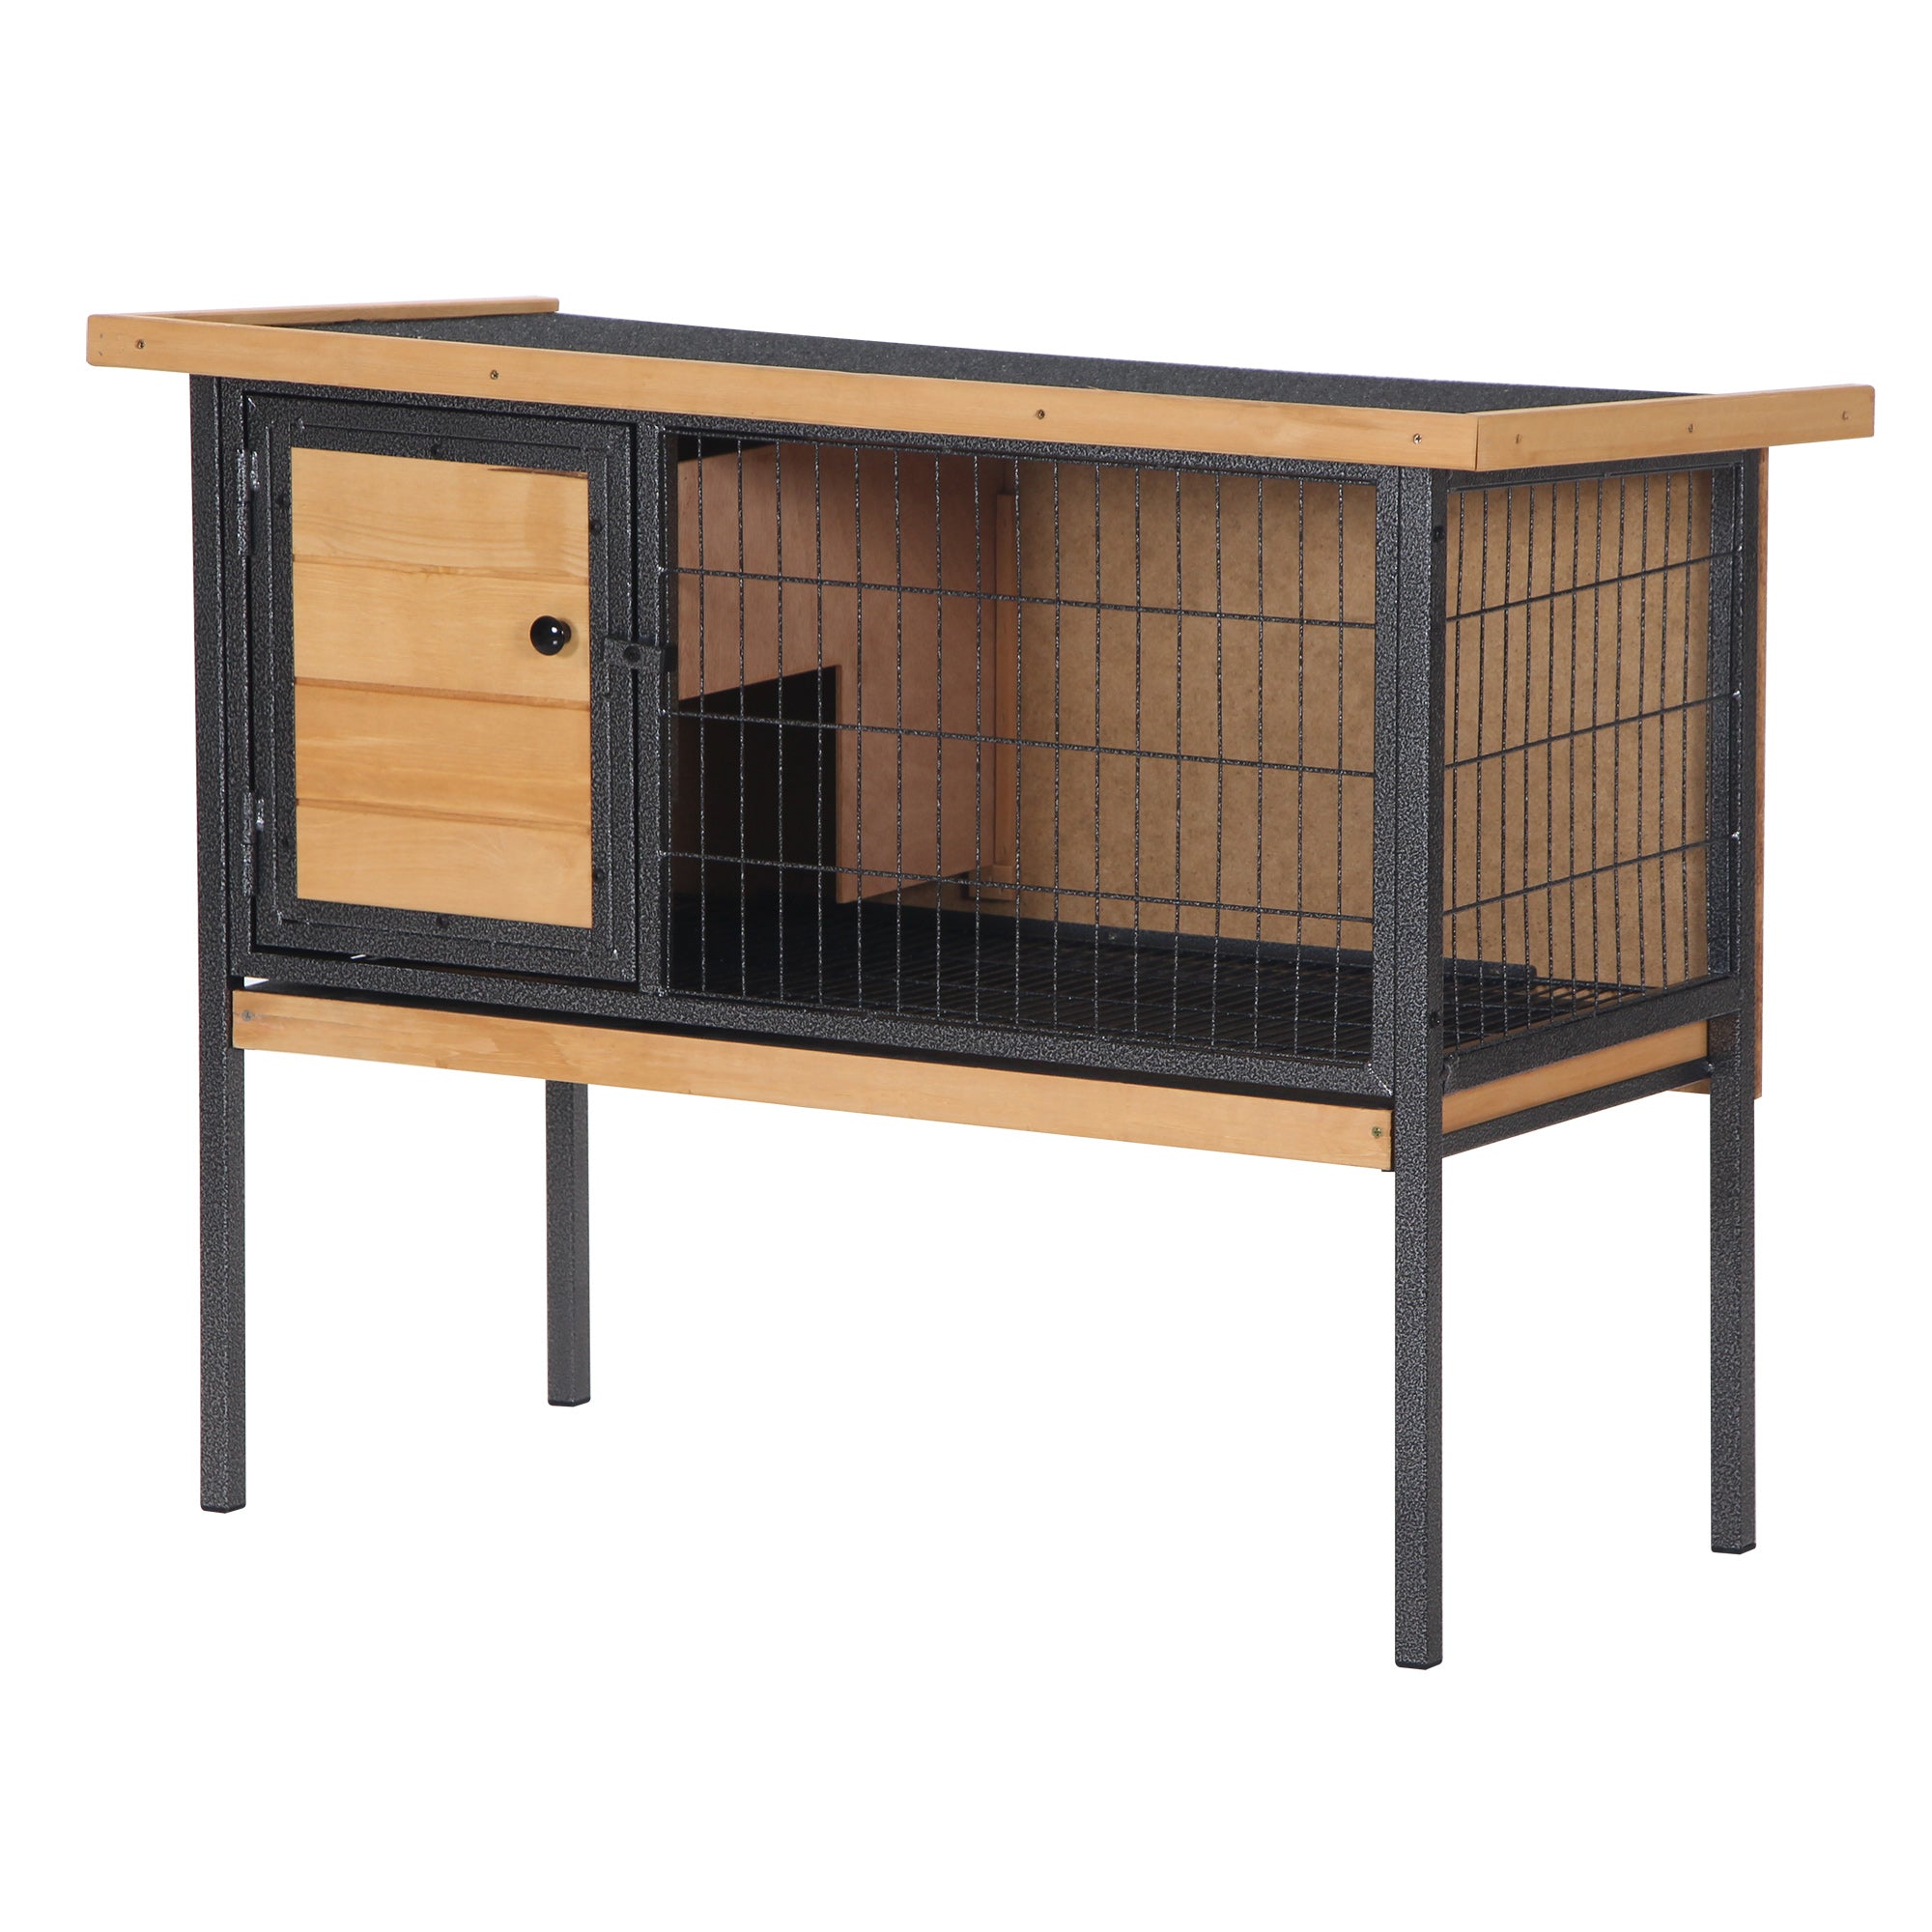 Wooden Rabbit Hutch Elevated Pet House Bunny with Slide-Out Tray Outdoor Natural